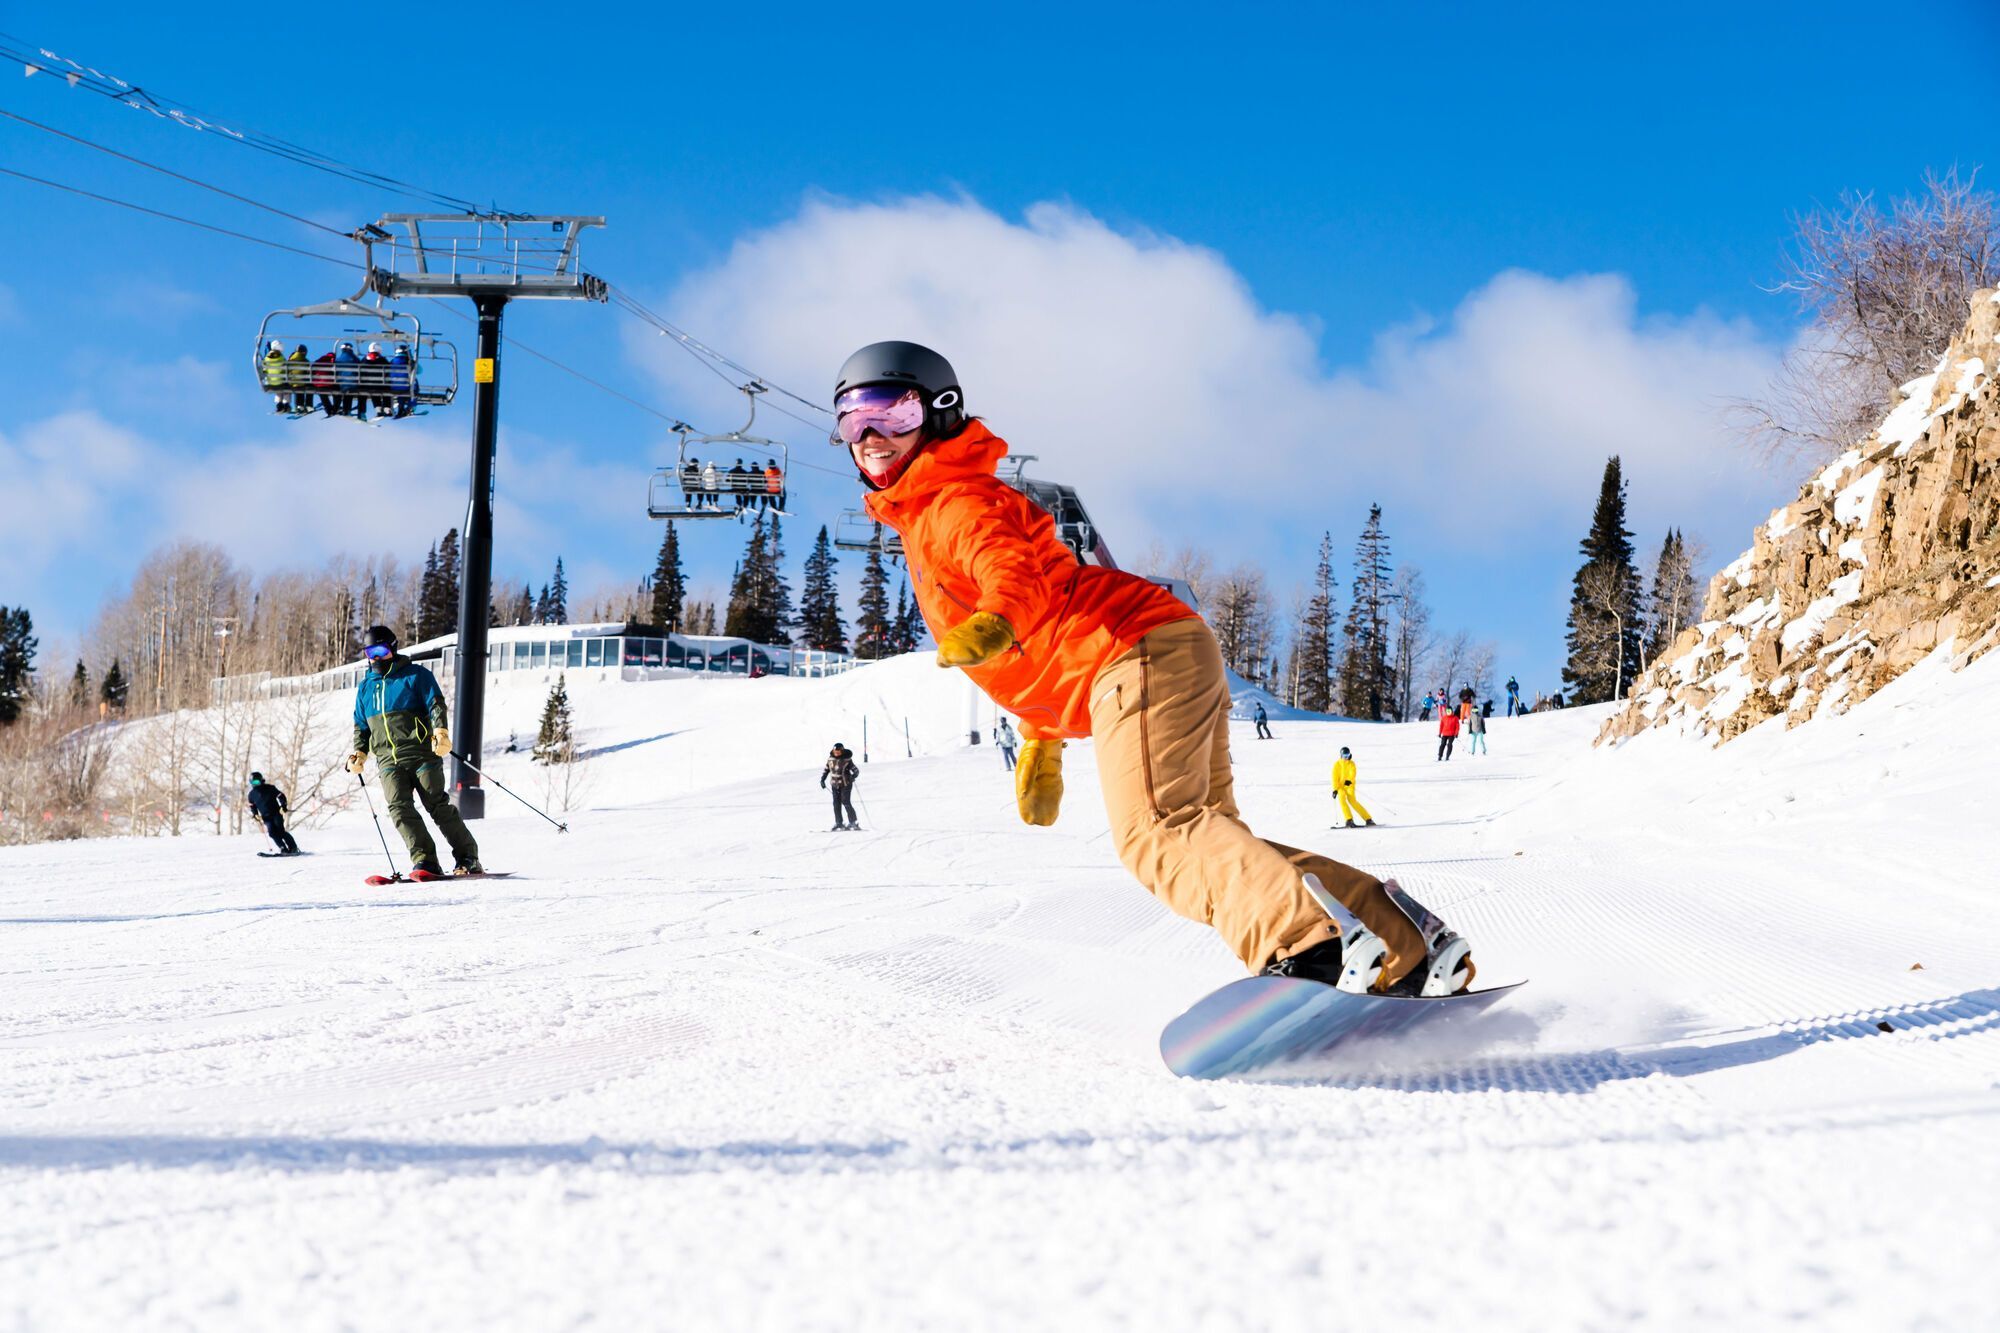 Top 15 ski resorts for families: great destinations to travel to